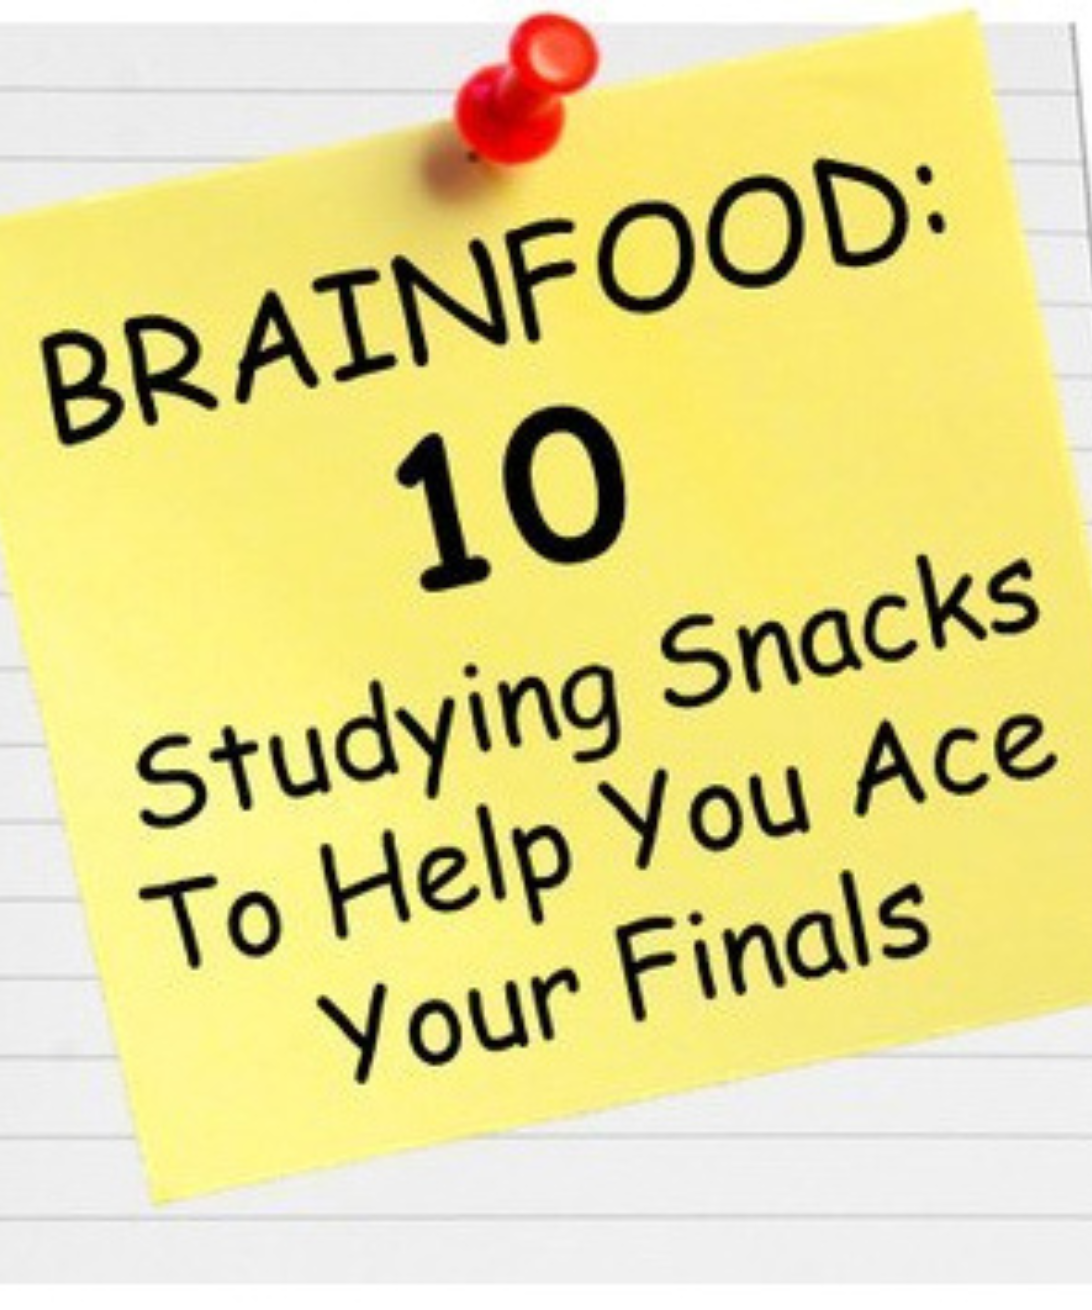 10 Studying Snacks to Help You Ace Your Finals